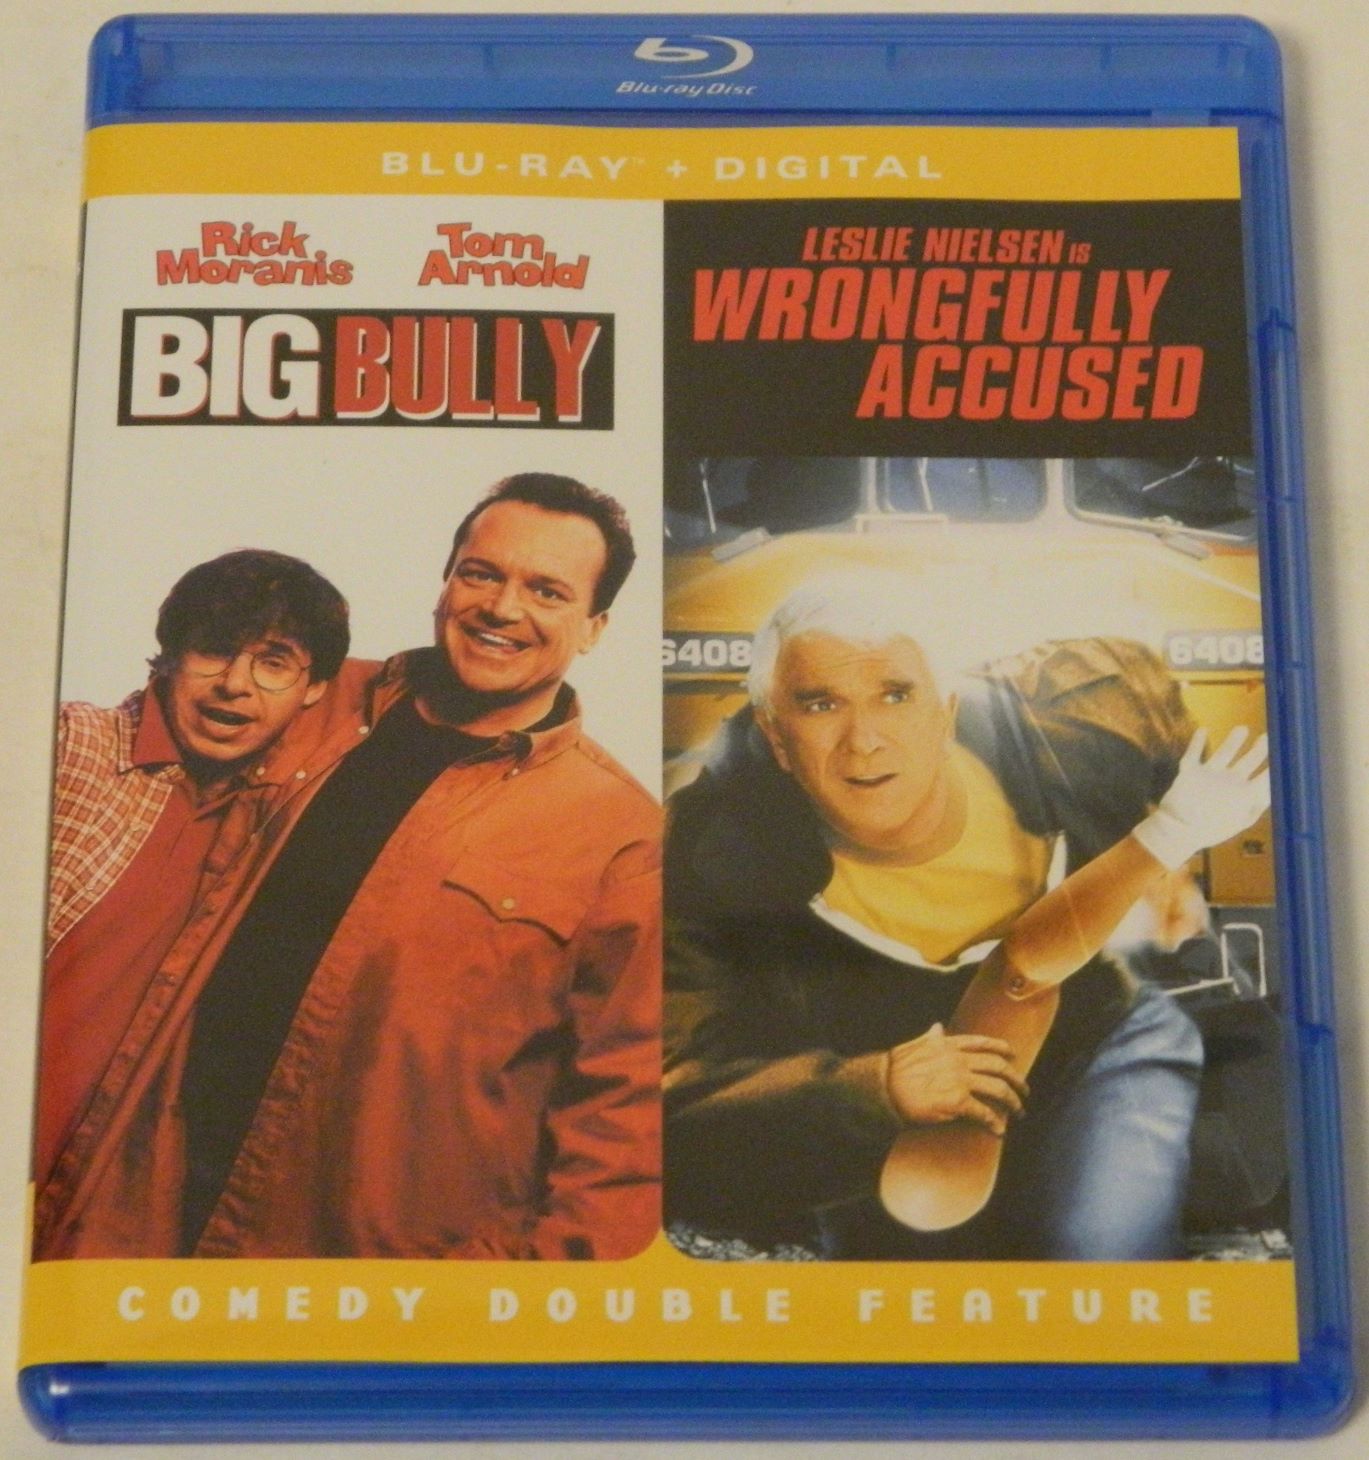 Big Bully and Wrongfully Accused Comedy Double Feature Blu-ray